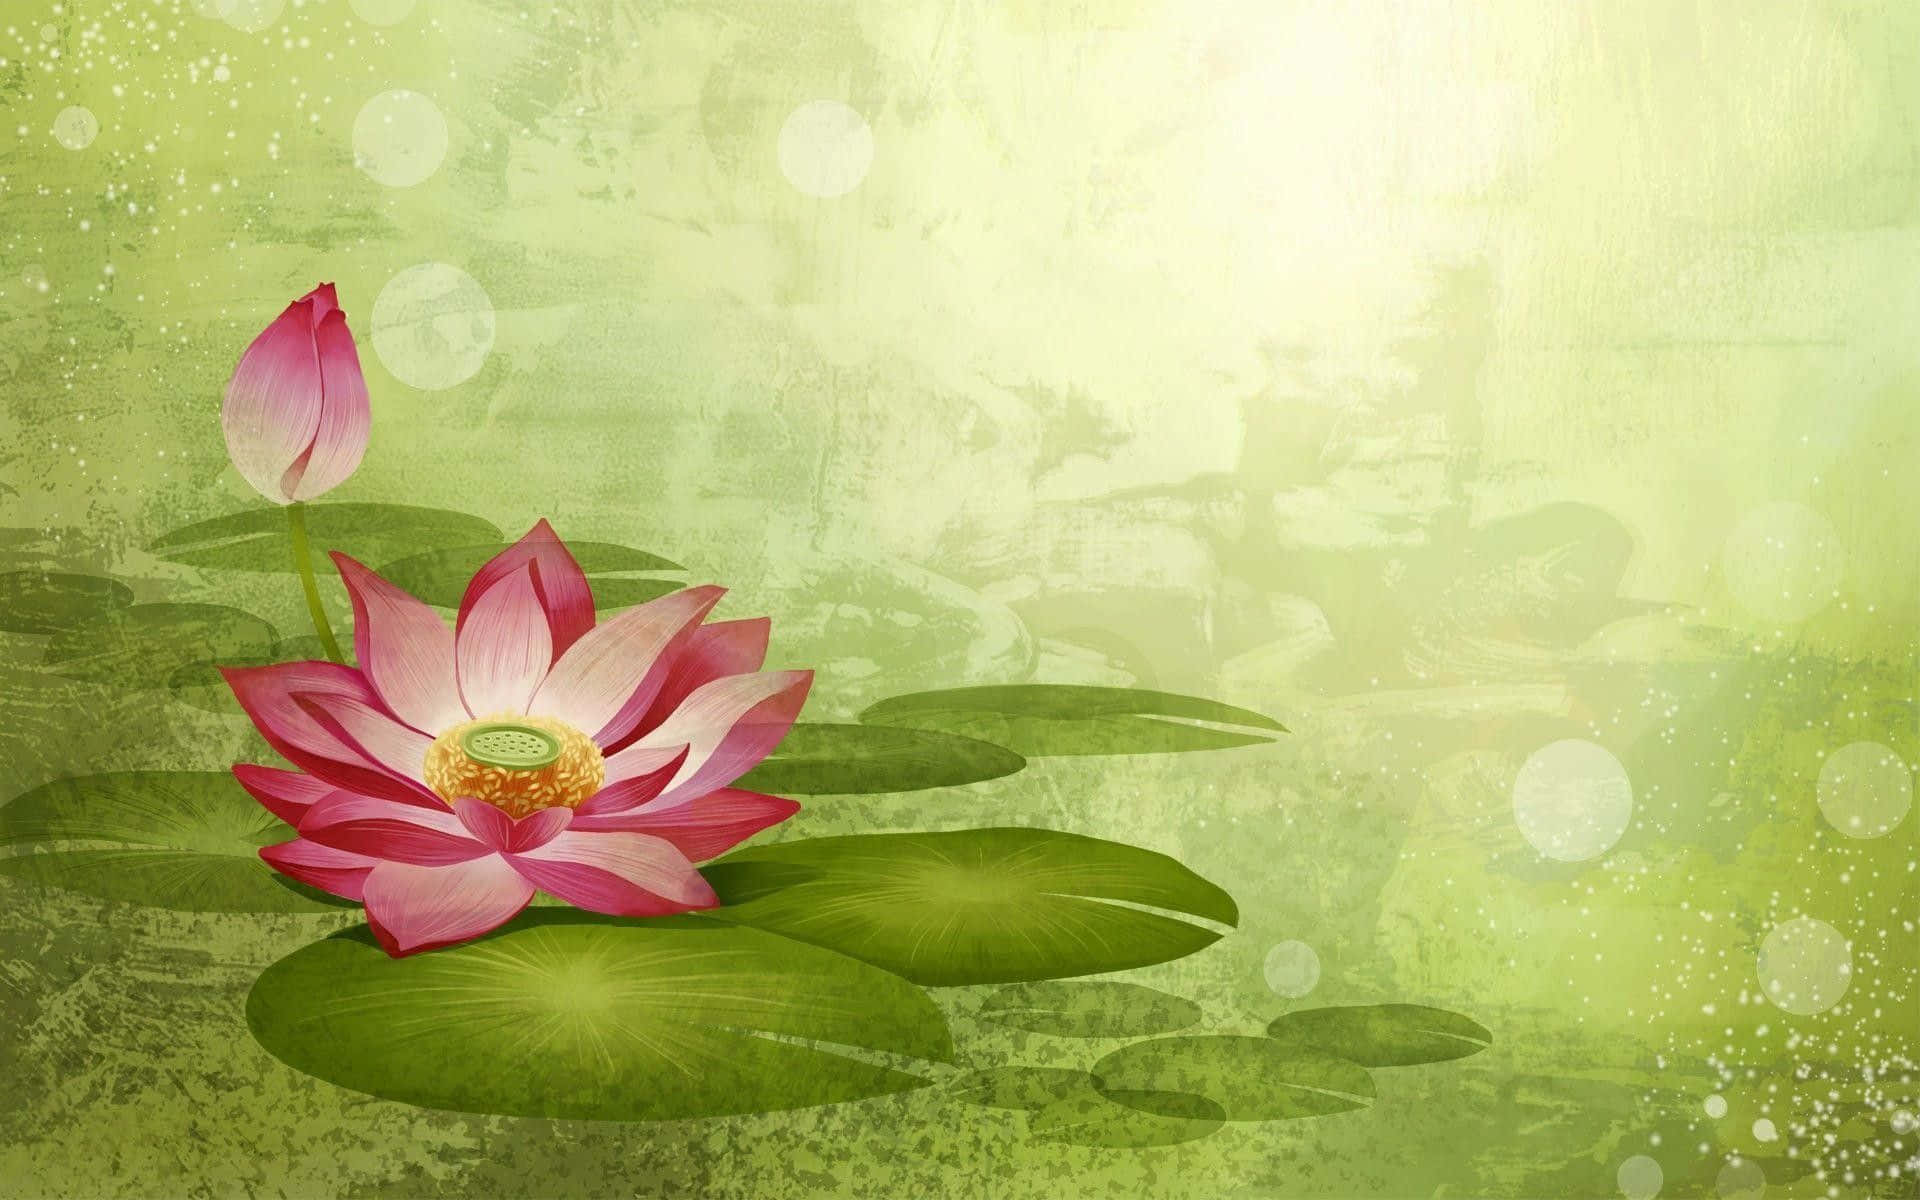 A tranquil lotus flower surrounded by a lush and peaceful pond.